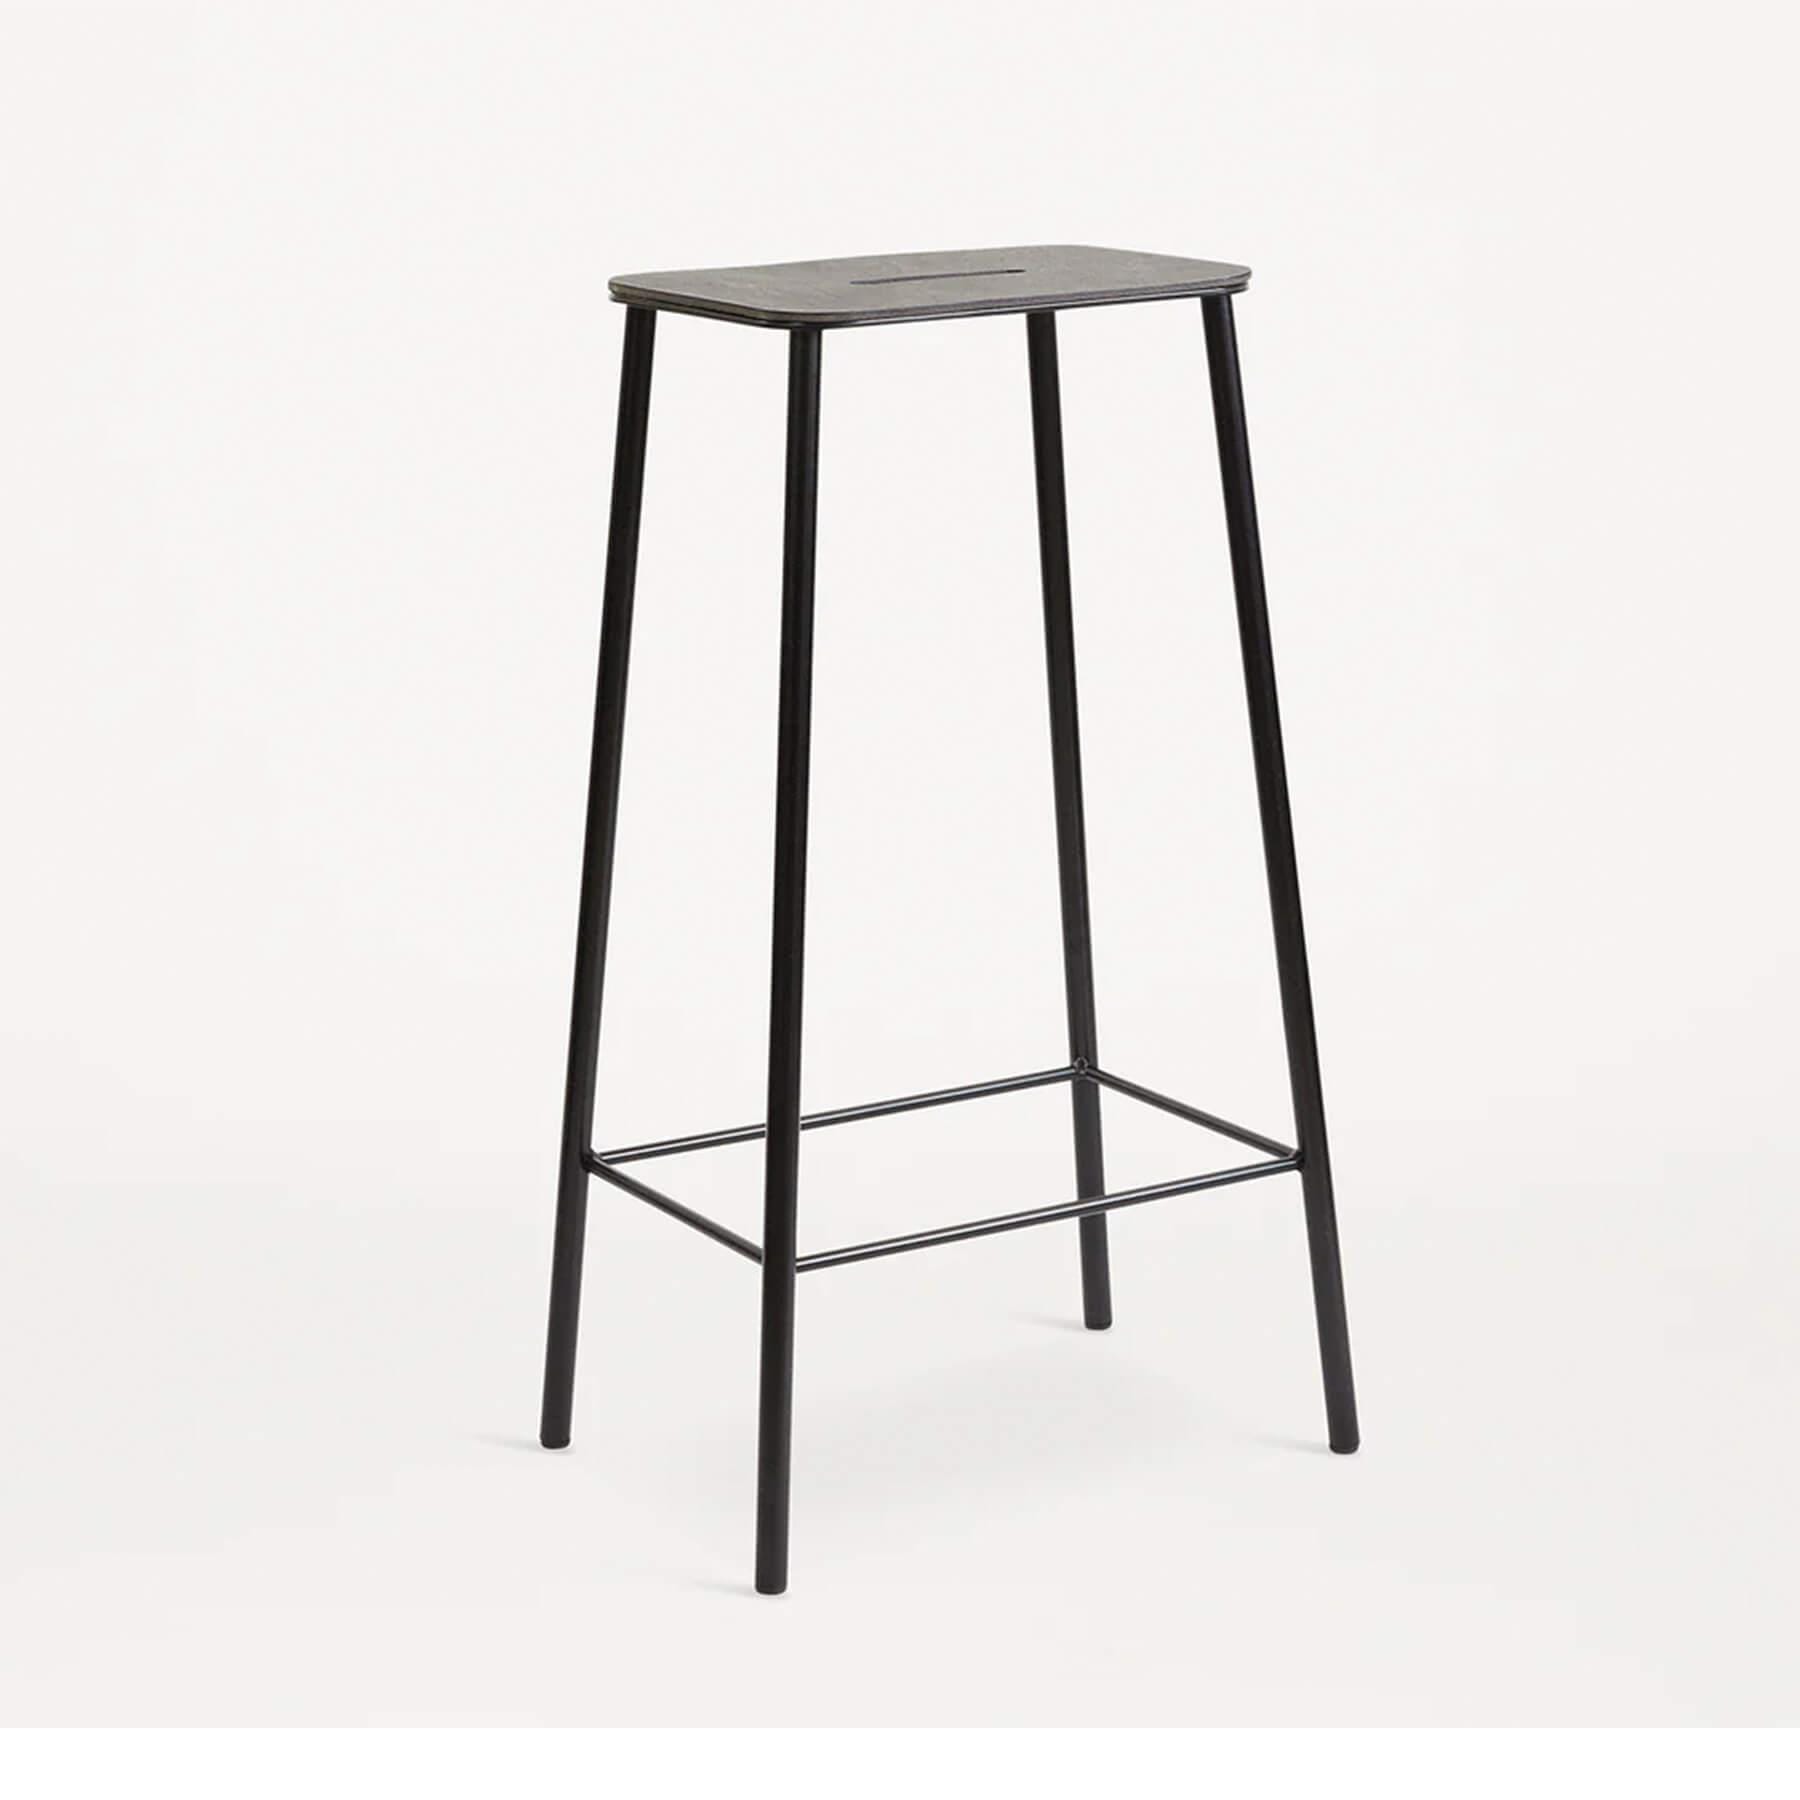 Frama Adam Counter Bar Stool Anthracite Leather With Black Legs High Bar Stool Designer Furniture From Holloways Of Ludlow